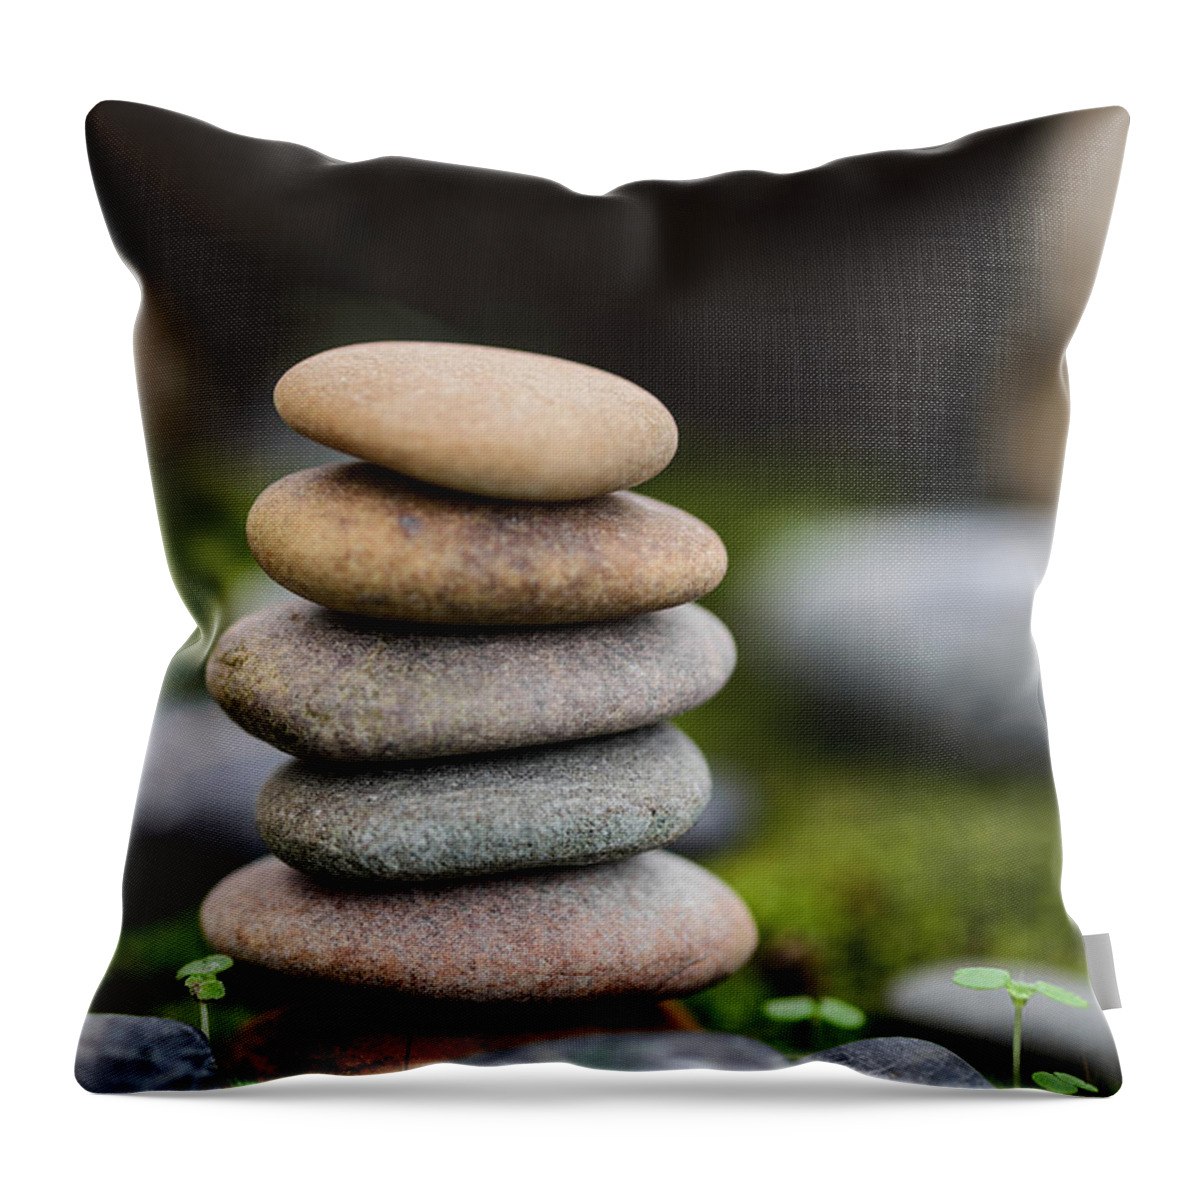 Peaceful Throw Pillow featuring the photograph Stacked Stones B2 by Marco Oliveira